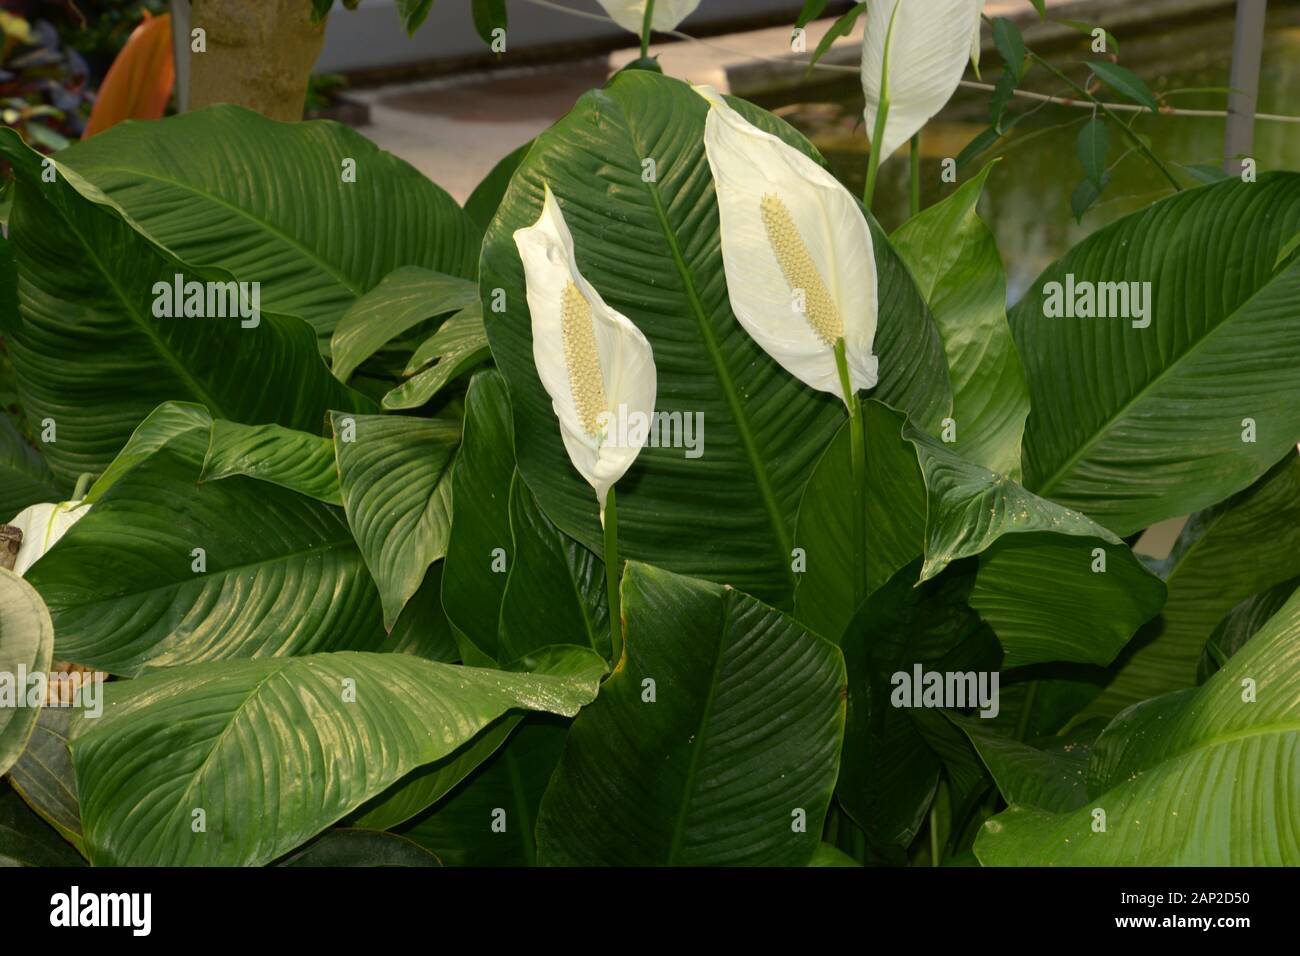 big plant of peace lily flower in bloom in botanical garden, spathiphyllum floribundum with exotic white flowers and green leaves Stock Photo